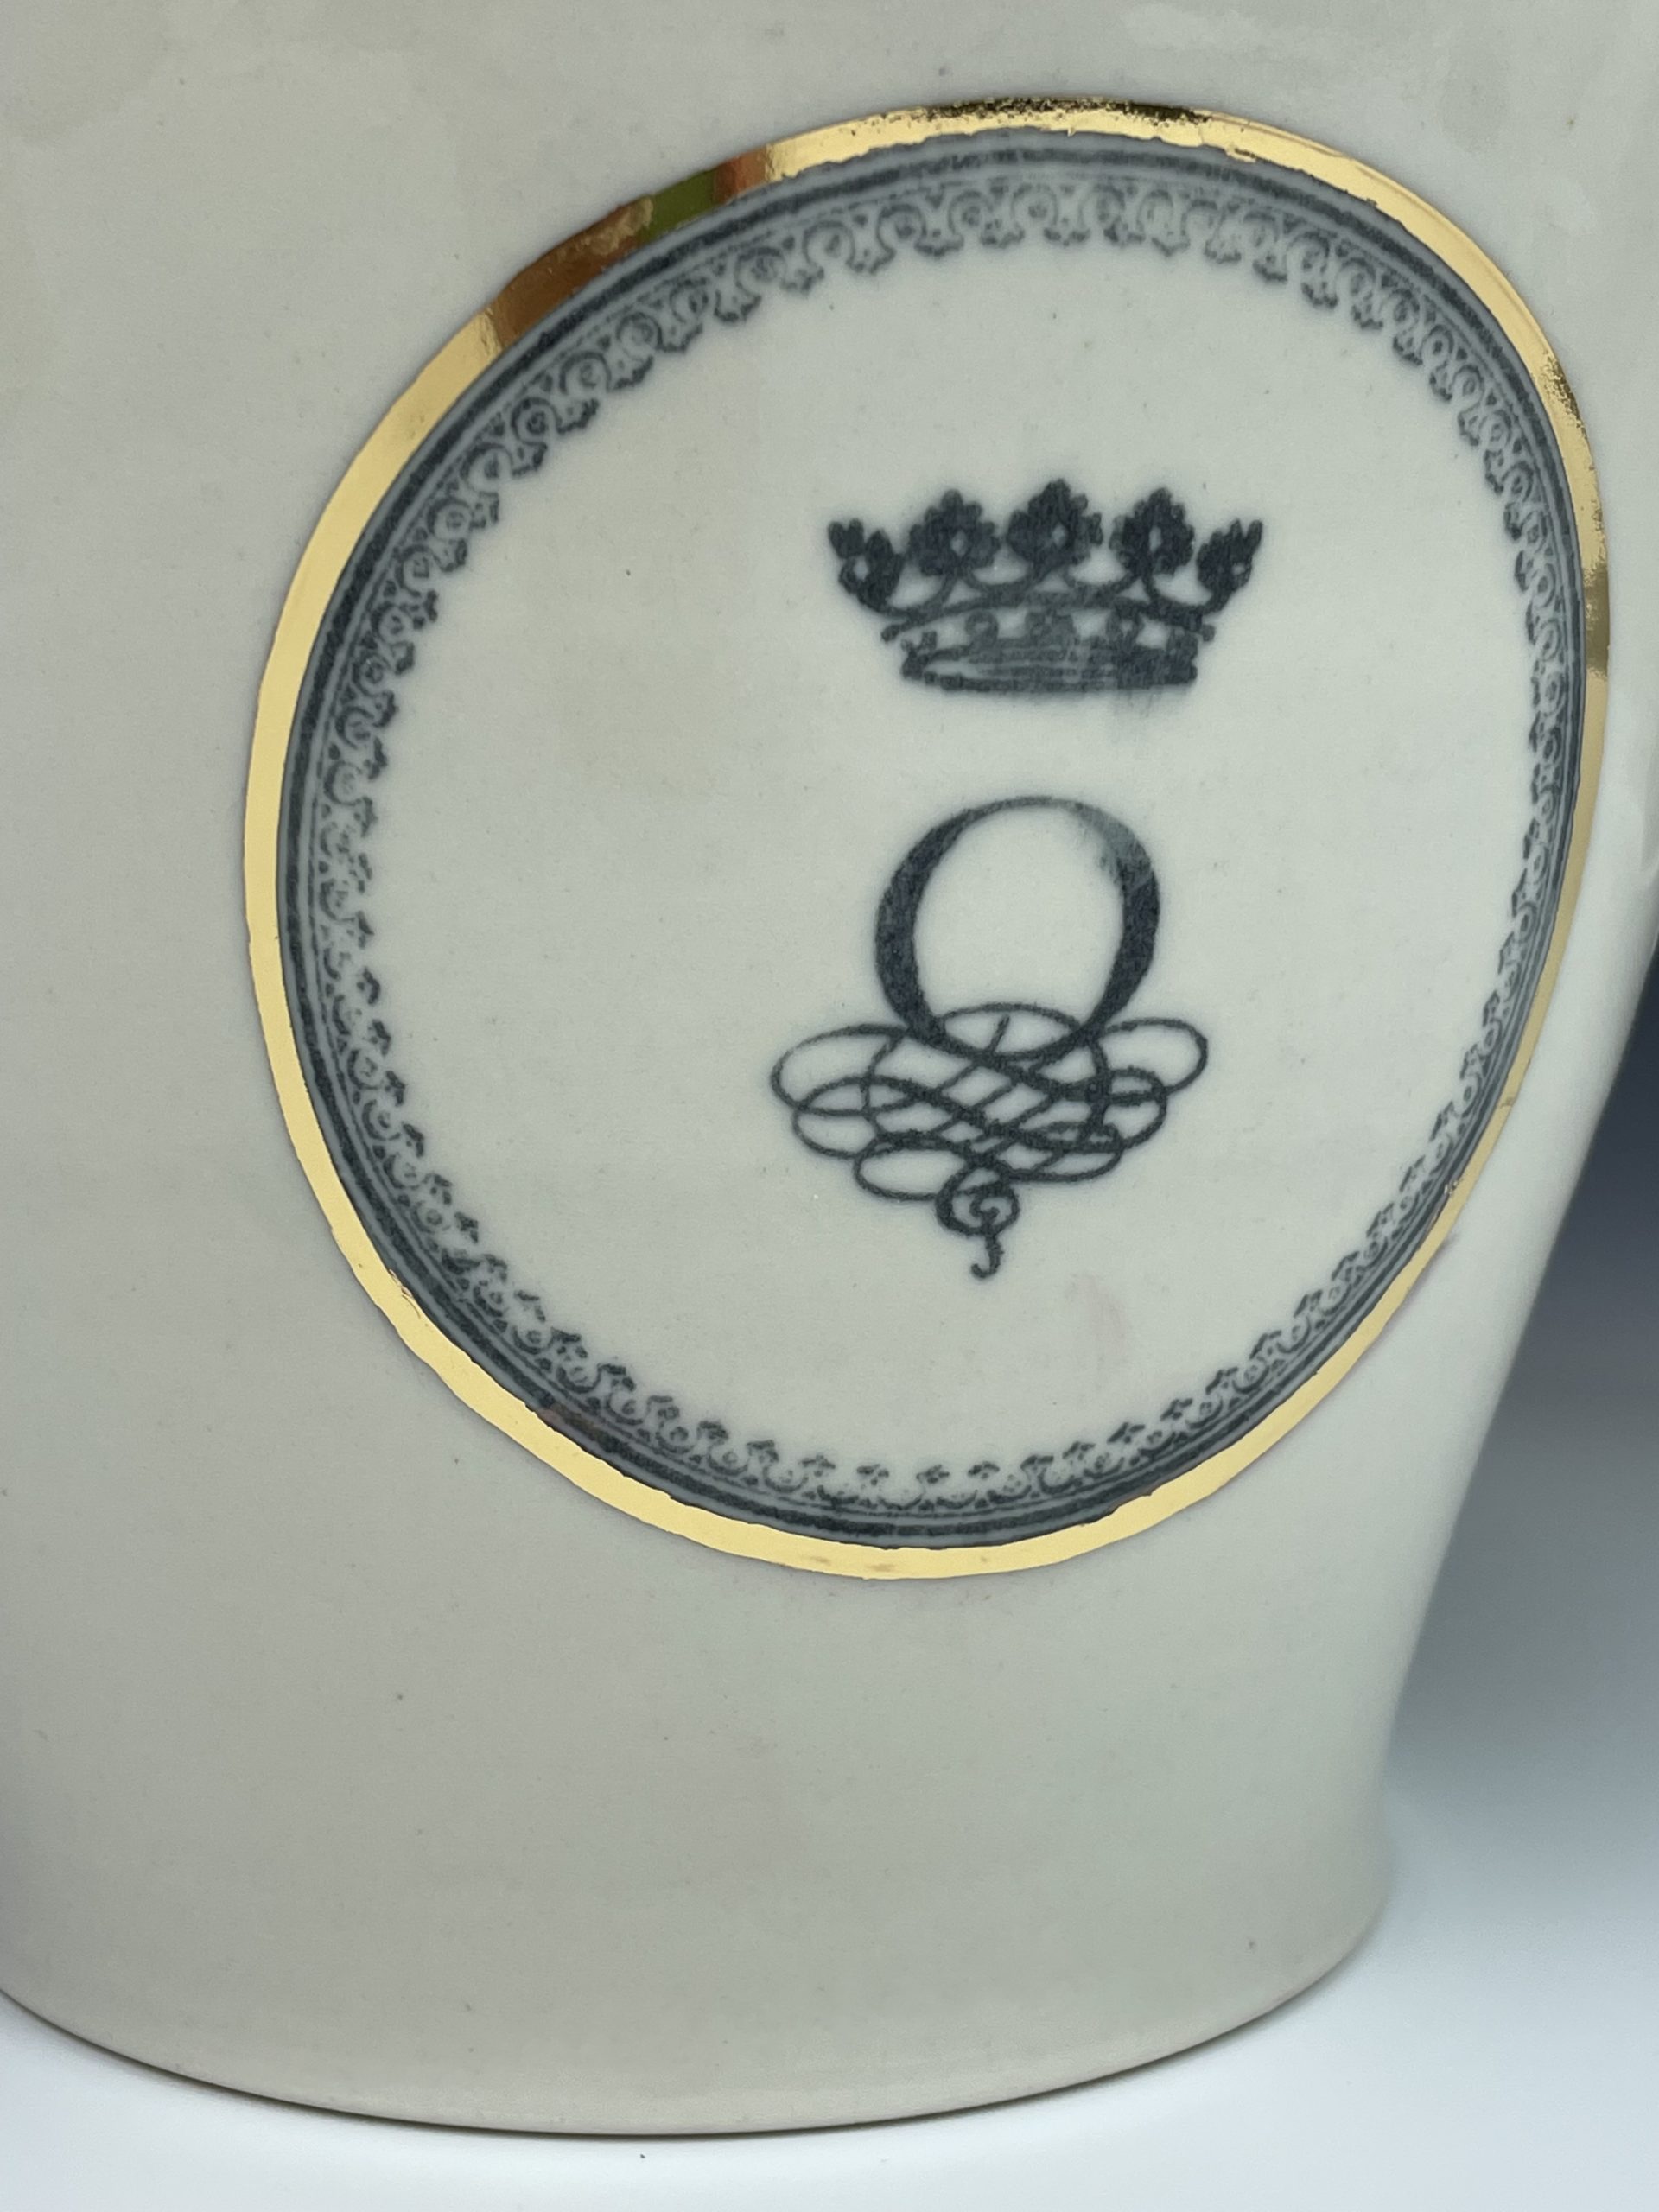 Zoom in of front of Oceano ice bucket showing stylized O with crown above it in a golden circle.